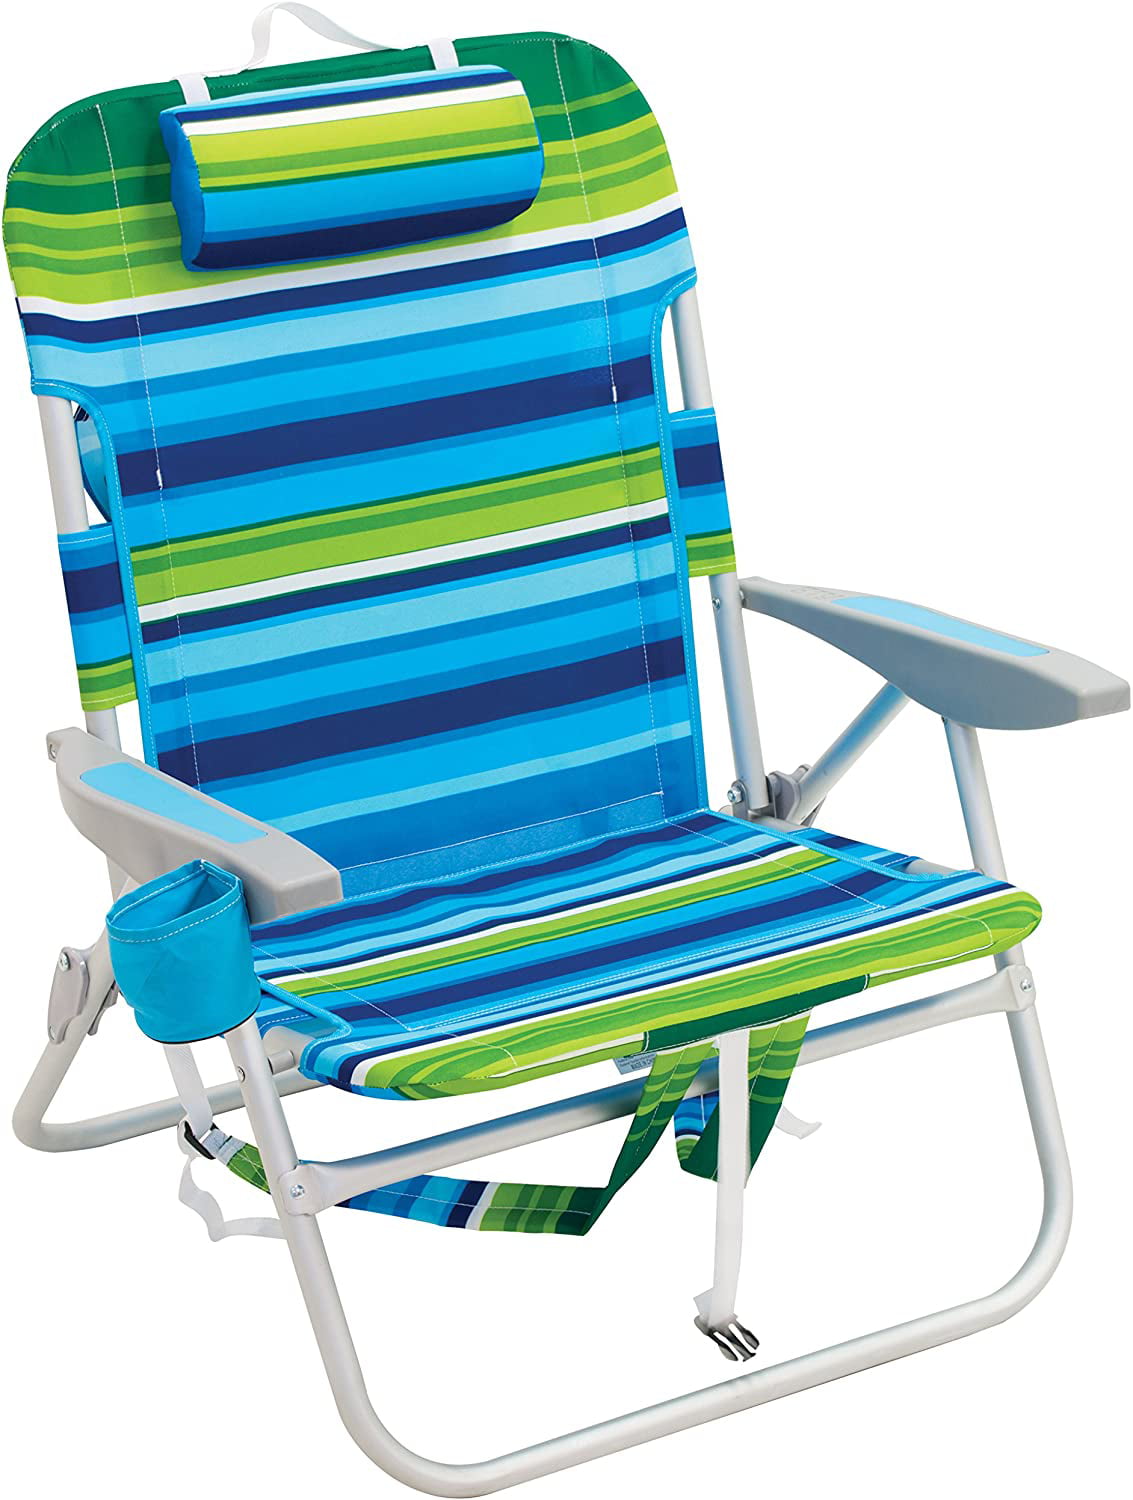  18 Inch High Seat Beach Chair with Simple Decor